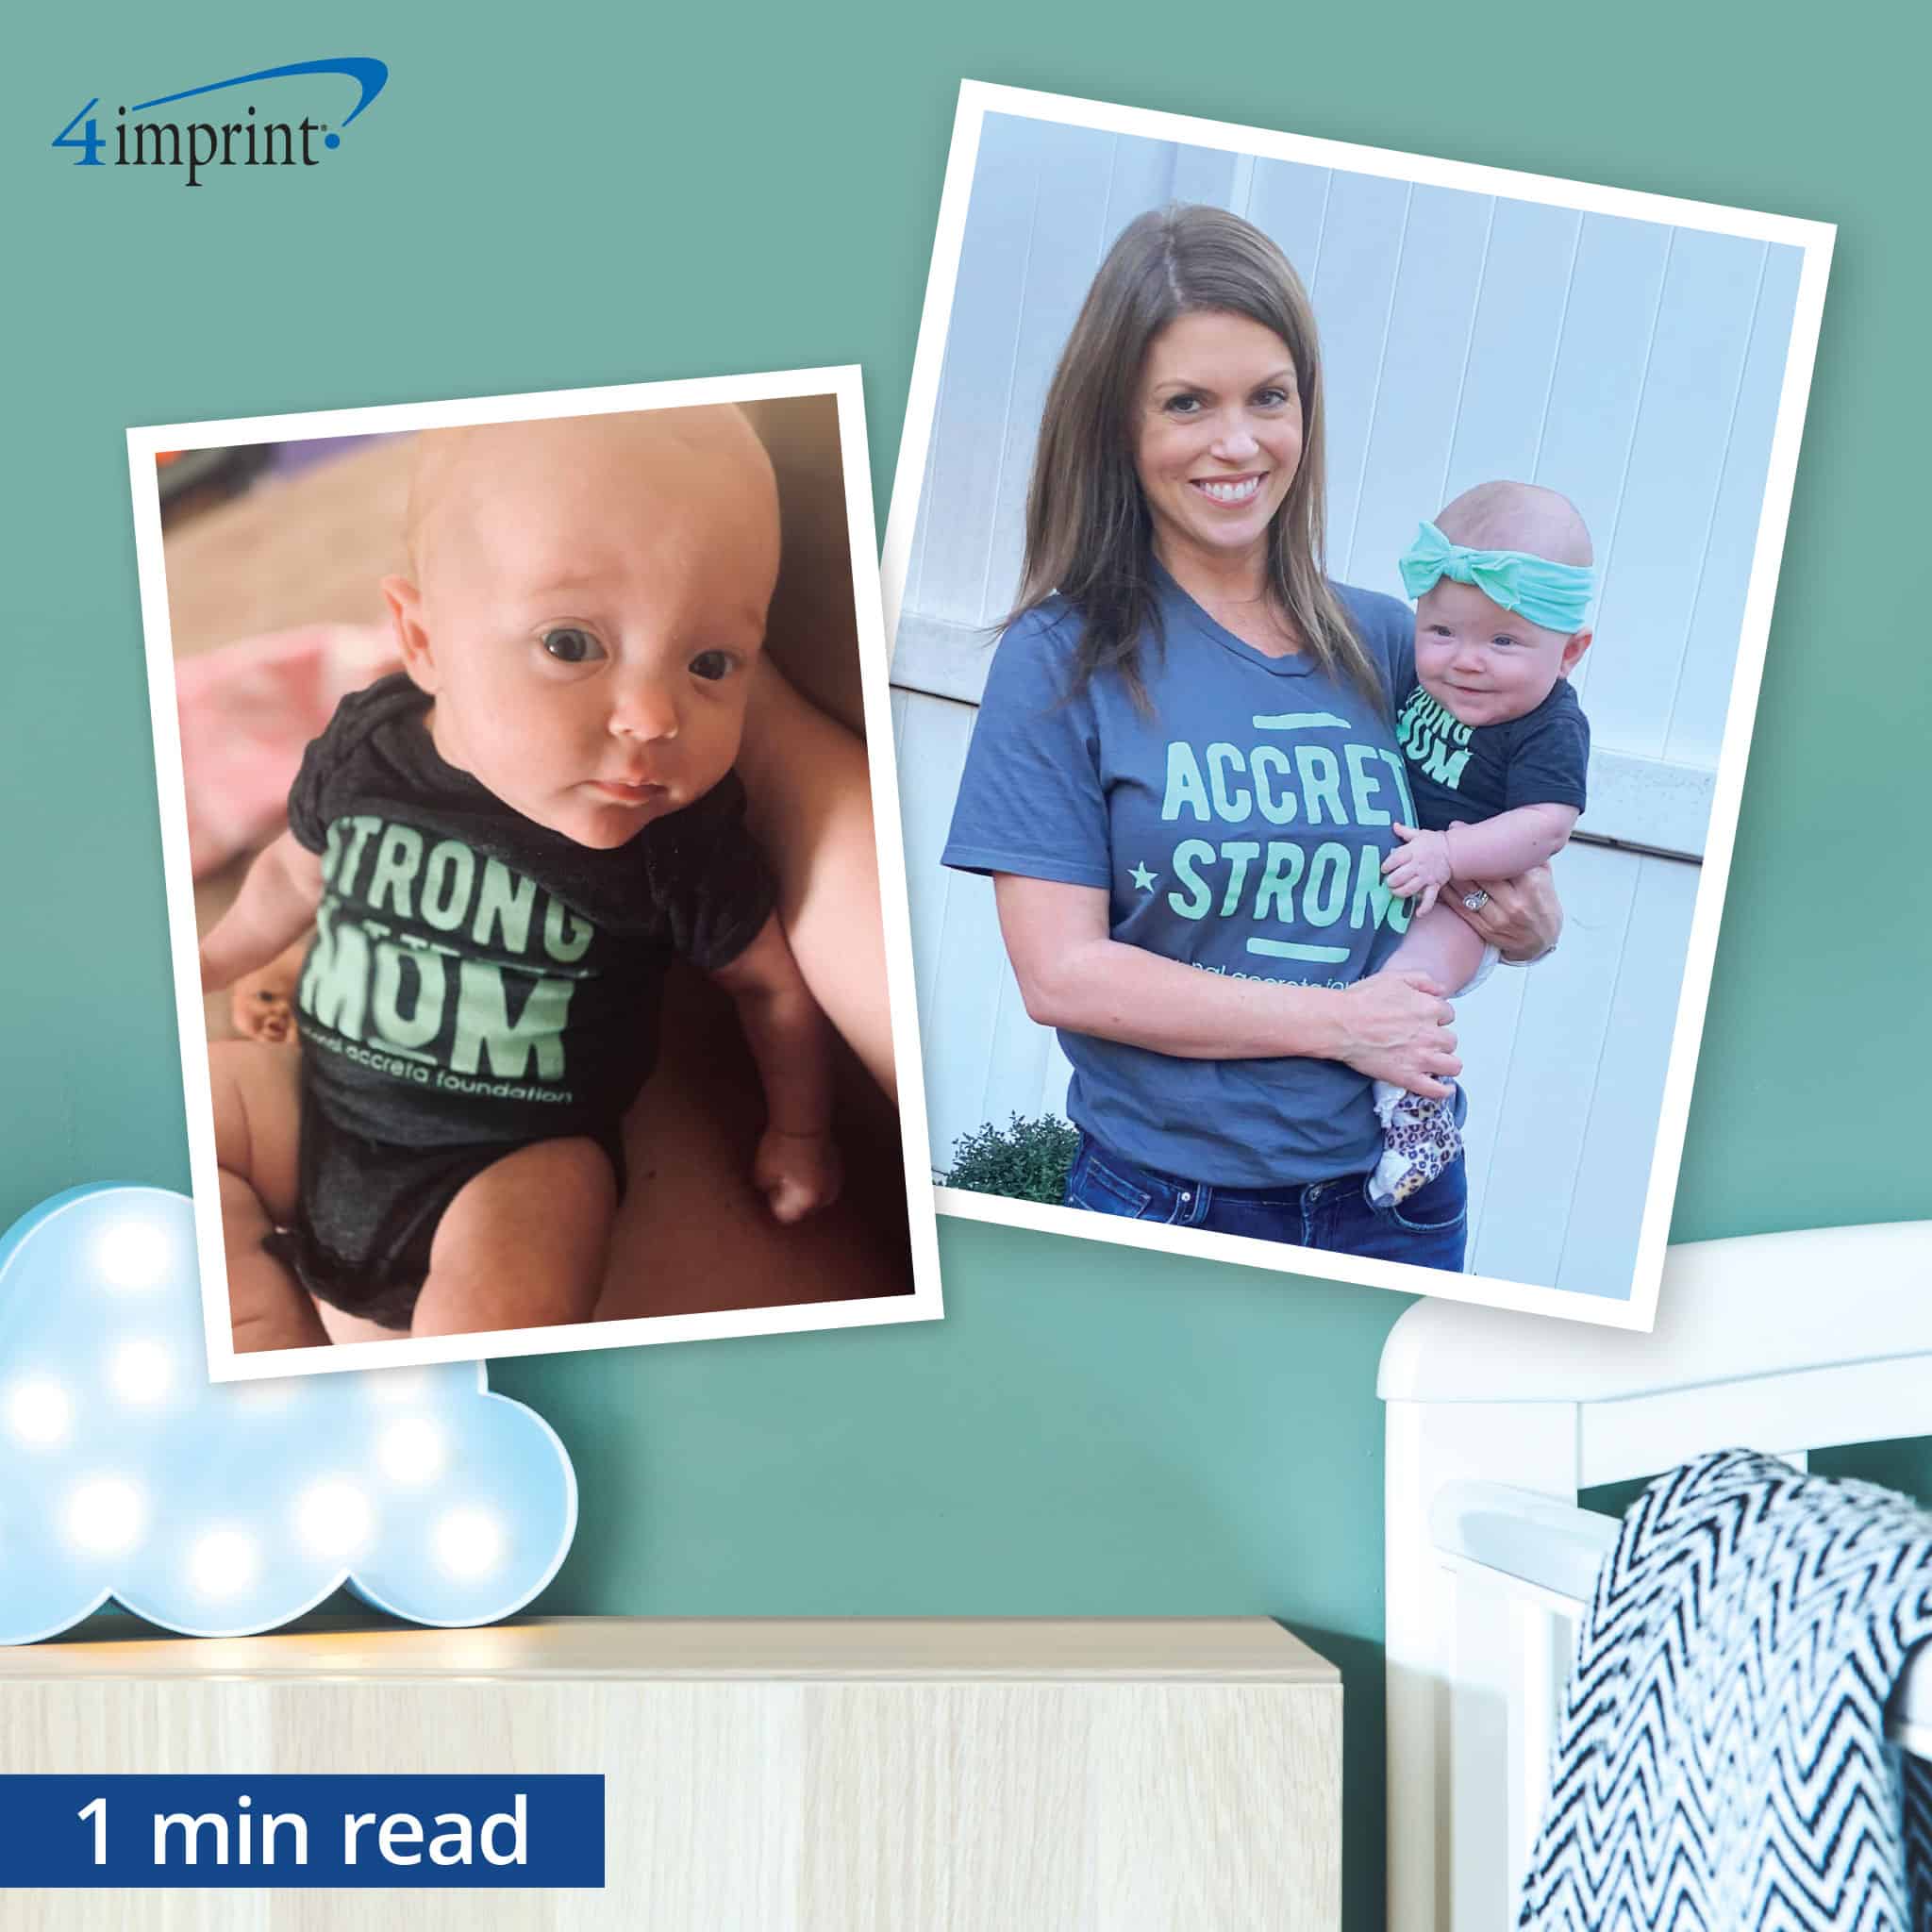 baby in "Strong like Mom" onesie and mom wearing "Accreta Strong" t-shirt